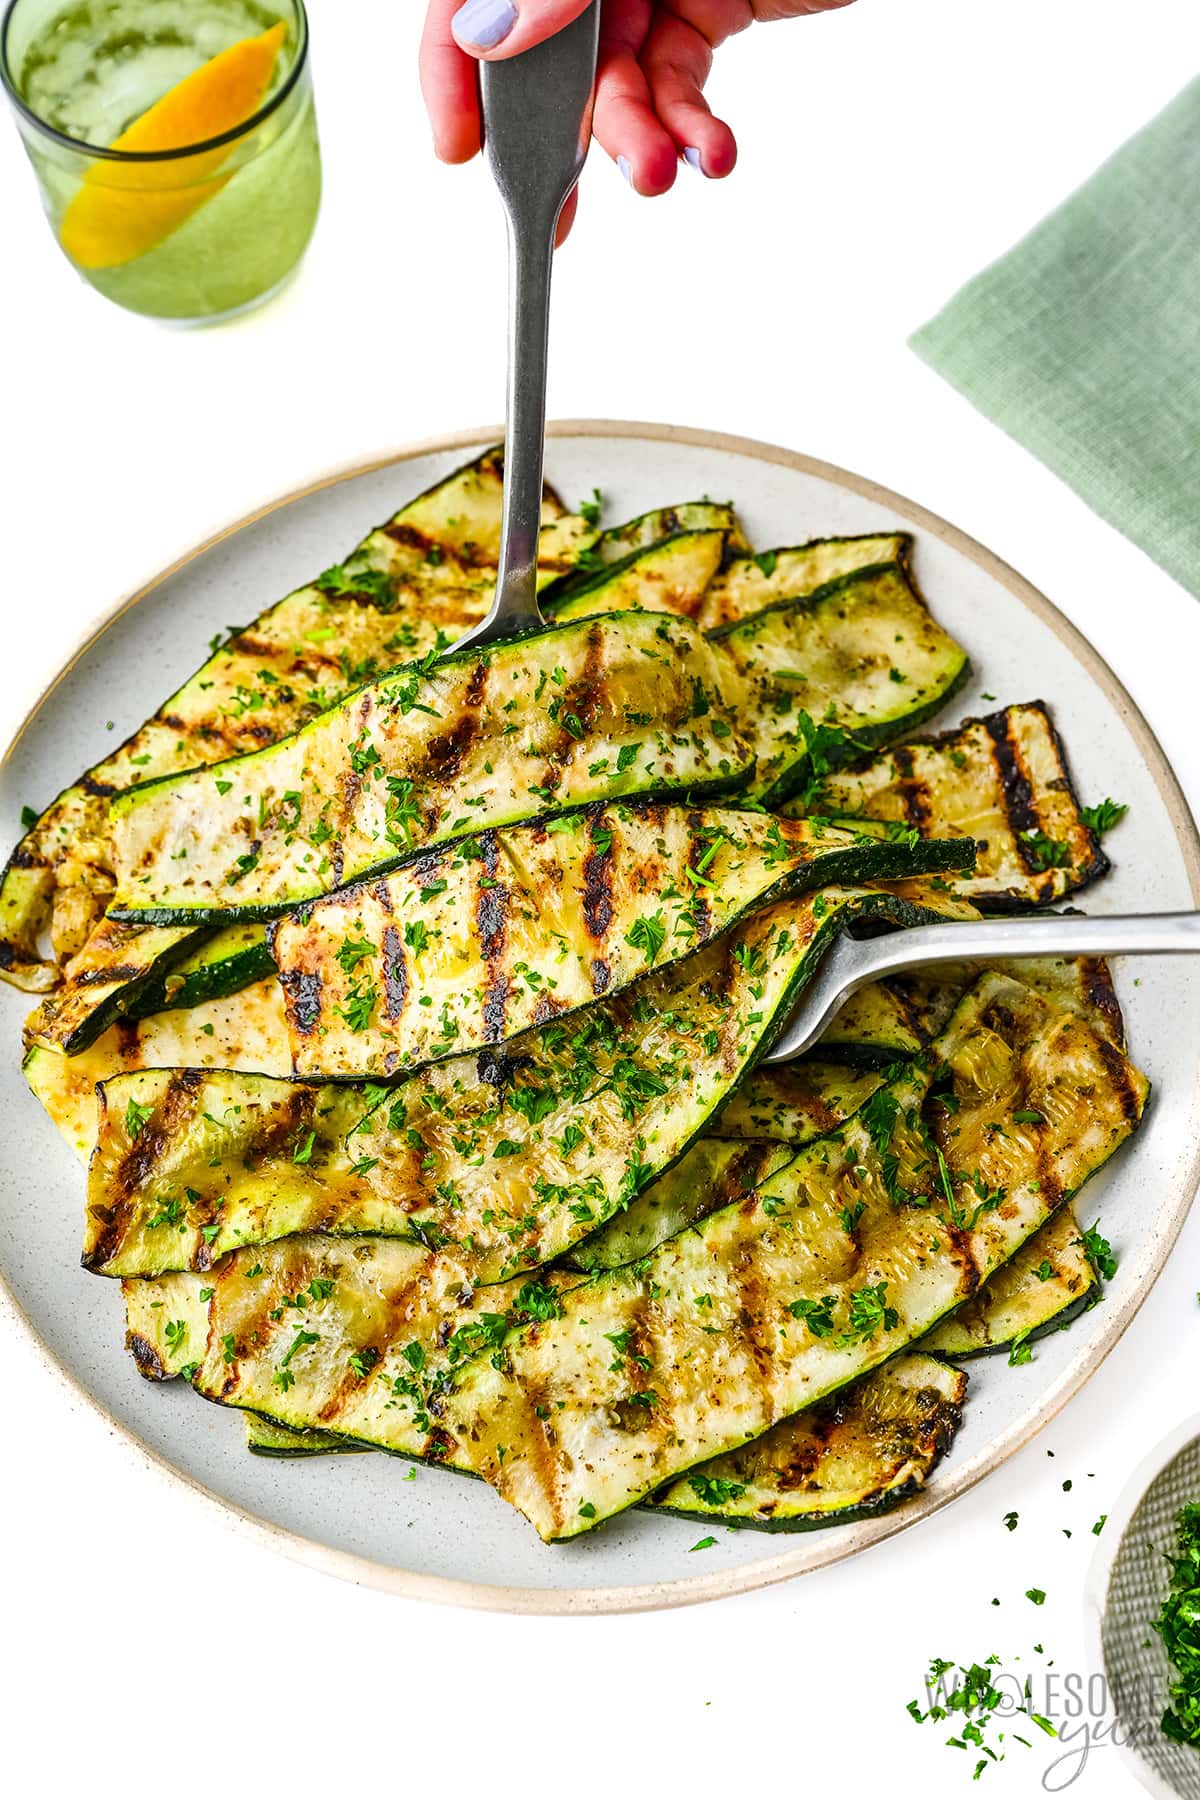 Grilled zucchini recipe being served.